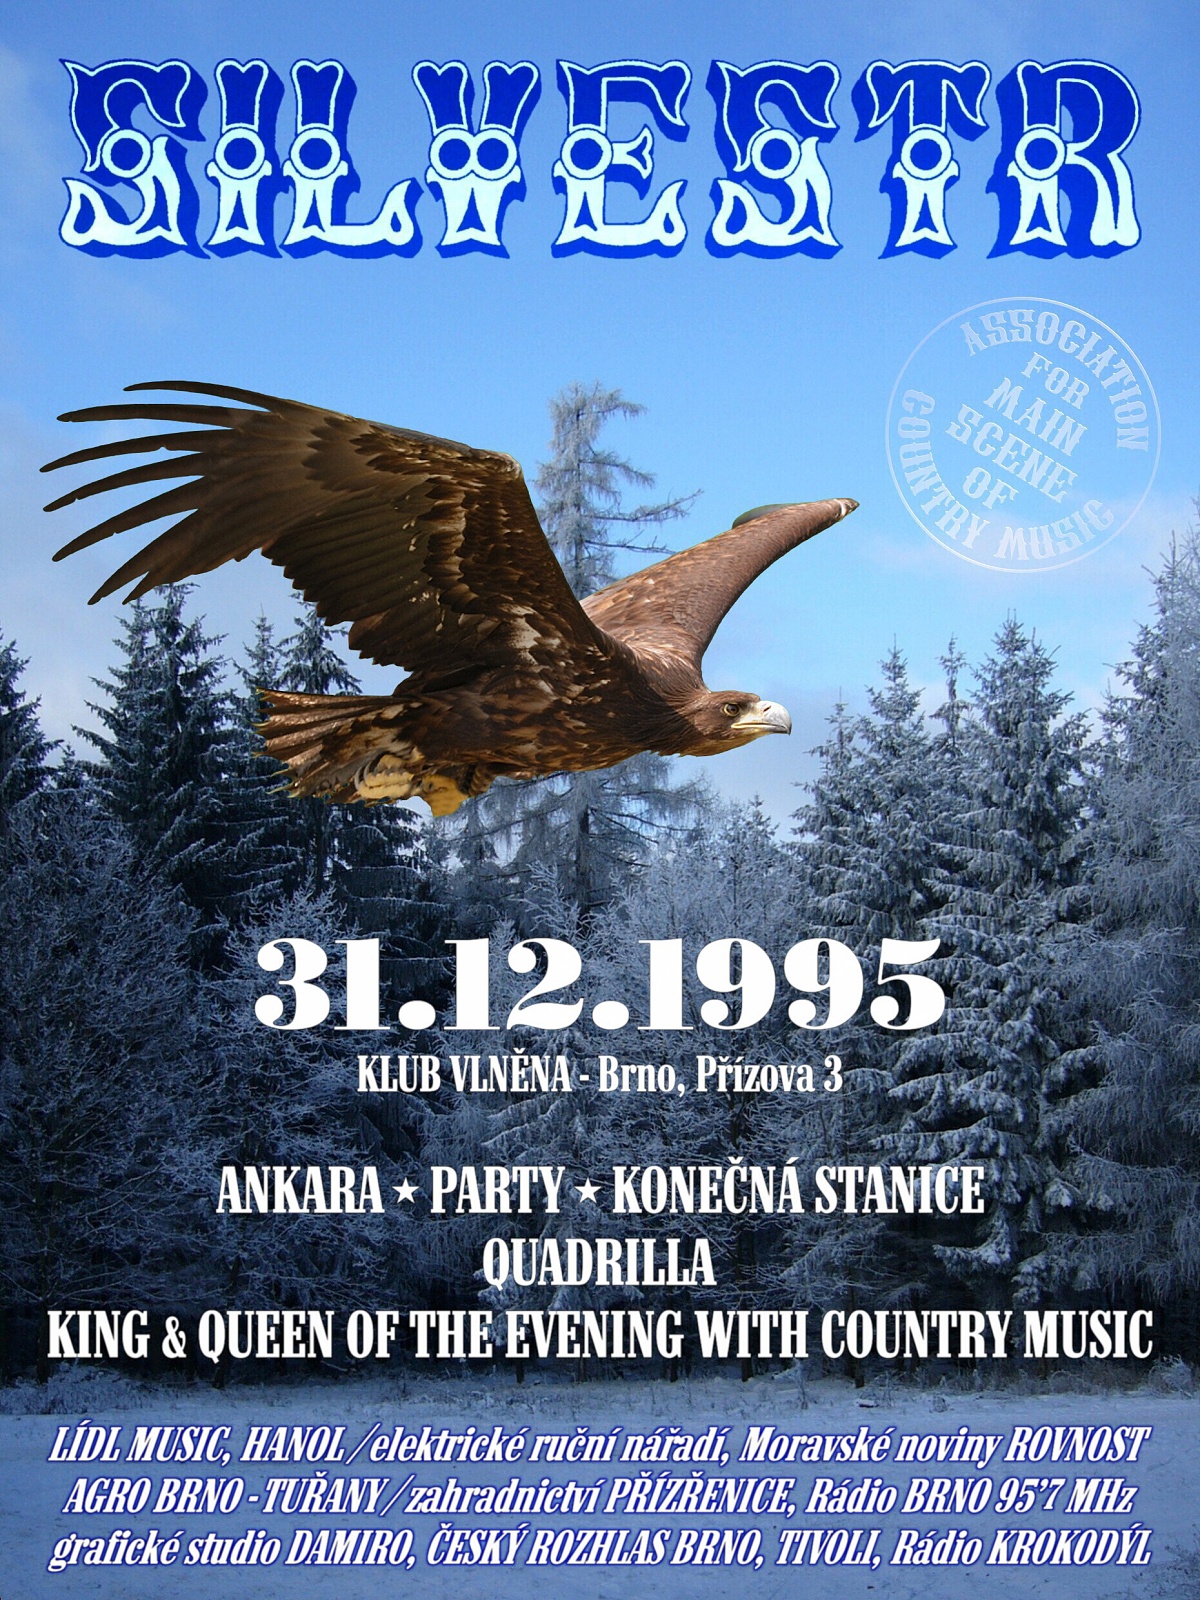 DANCE WITH COUNTRY MUSIC - SILVESTR 1995